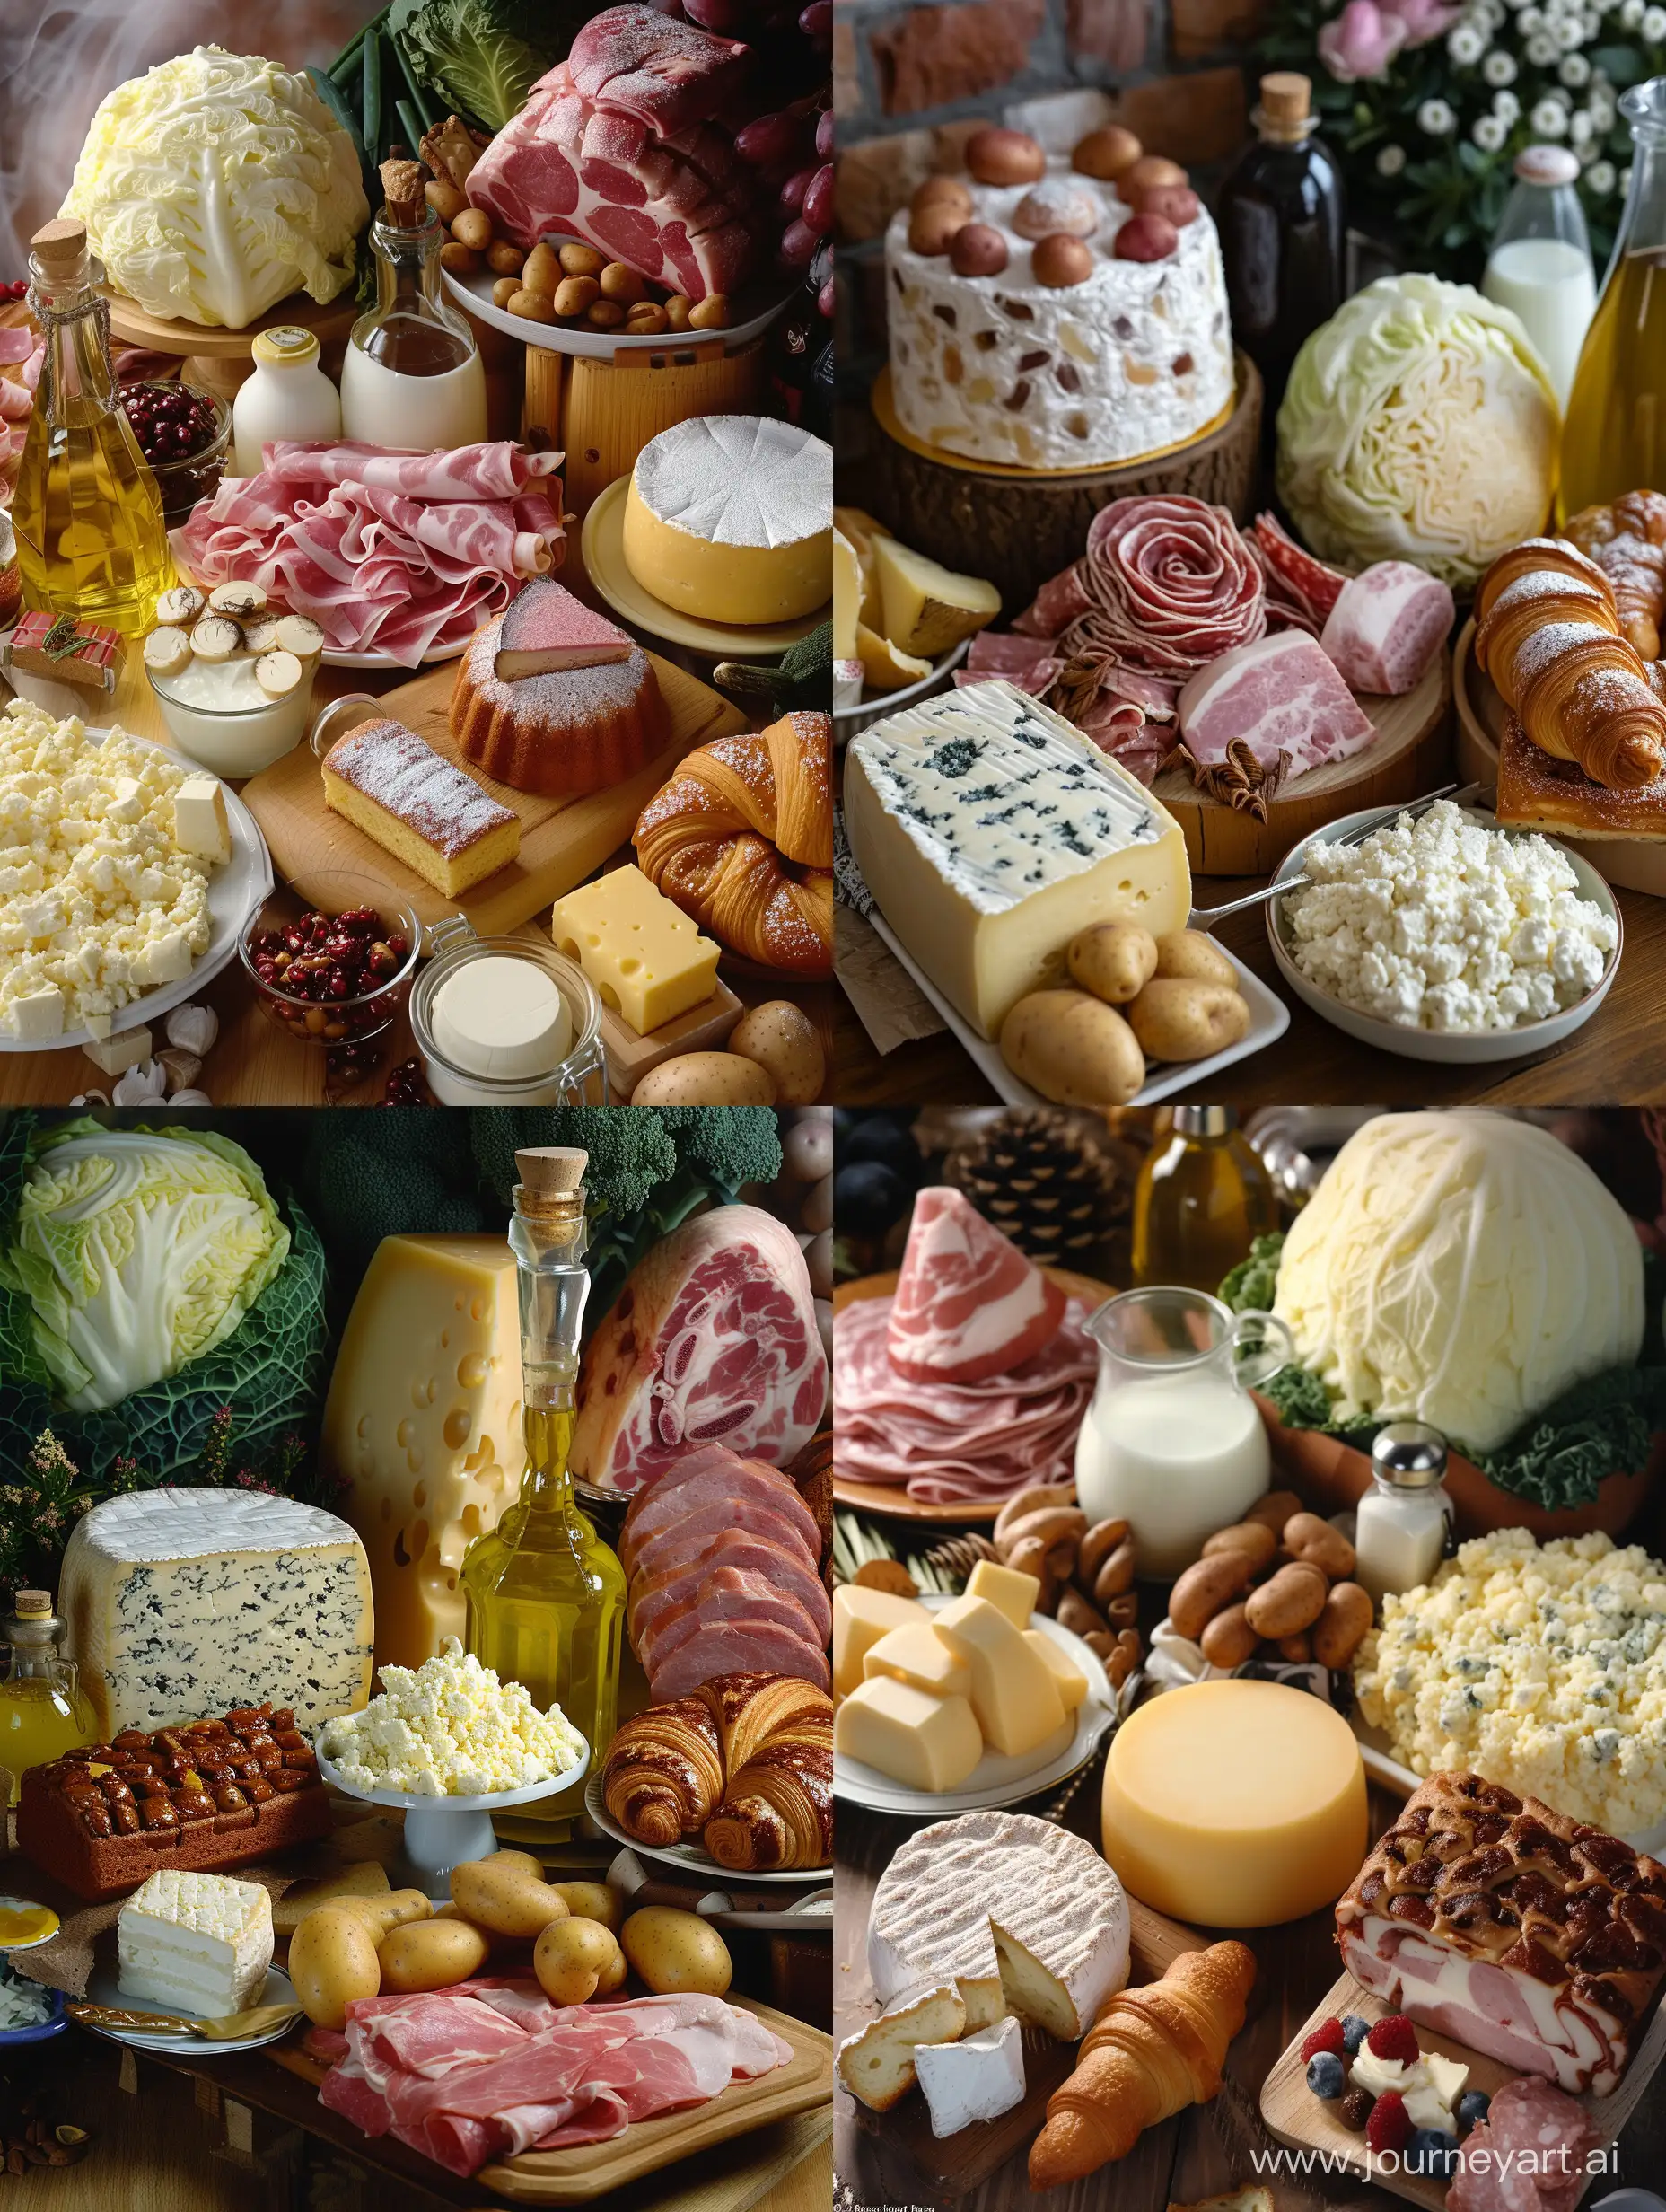 digital photo, farm products, lots of cheese, meat, ham, cottage cheese, milk, butter, vegetable oil, cake, croissant, eclair, cake, bread, cabbage, potatoes